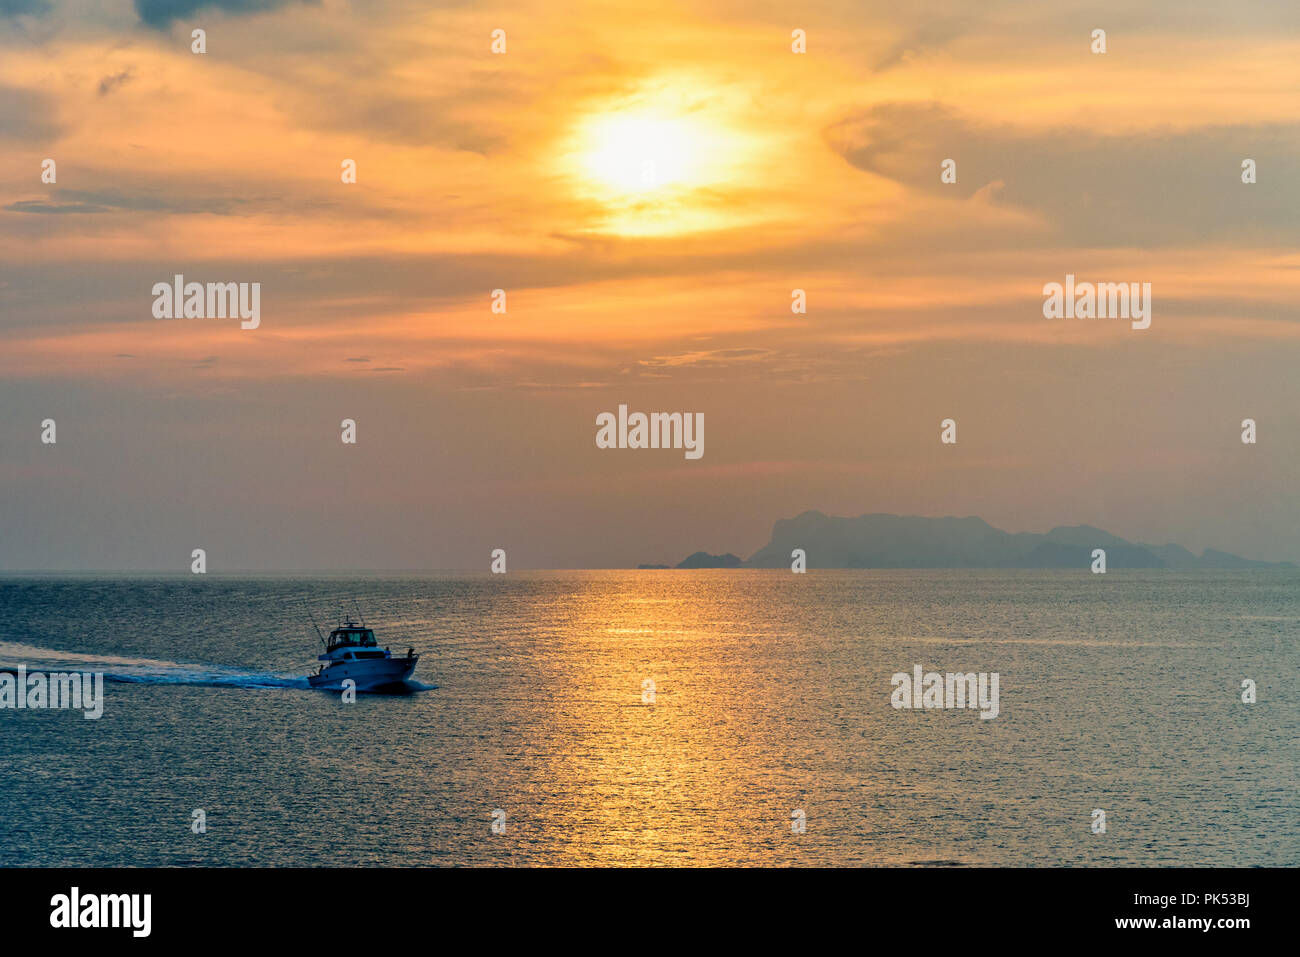 Speedboat for fishing on the sea returning to shore during the sunset in the midst of nature and the beautiful sky. Stock Photo